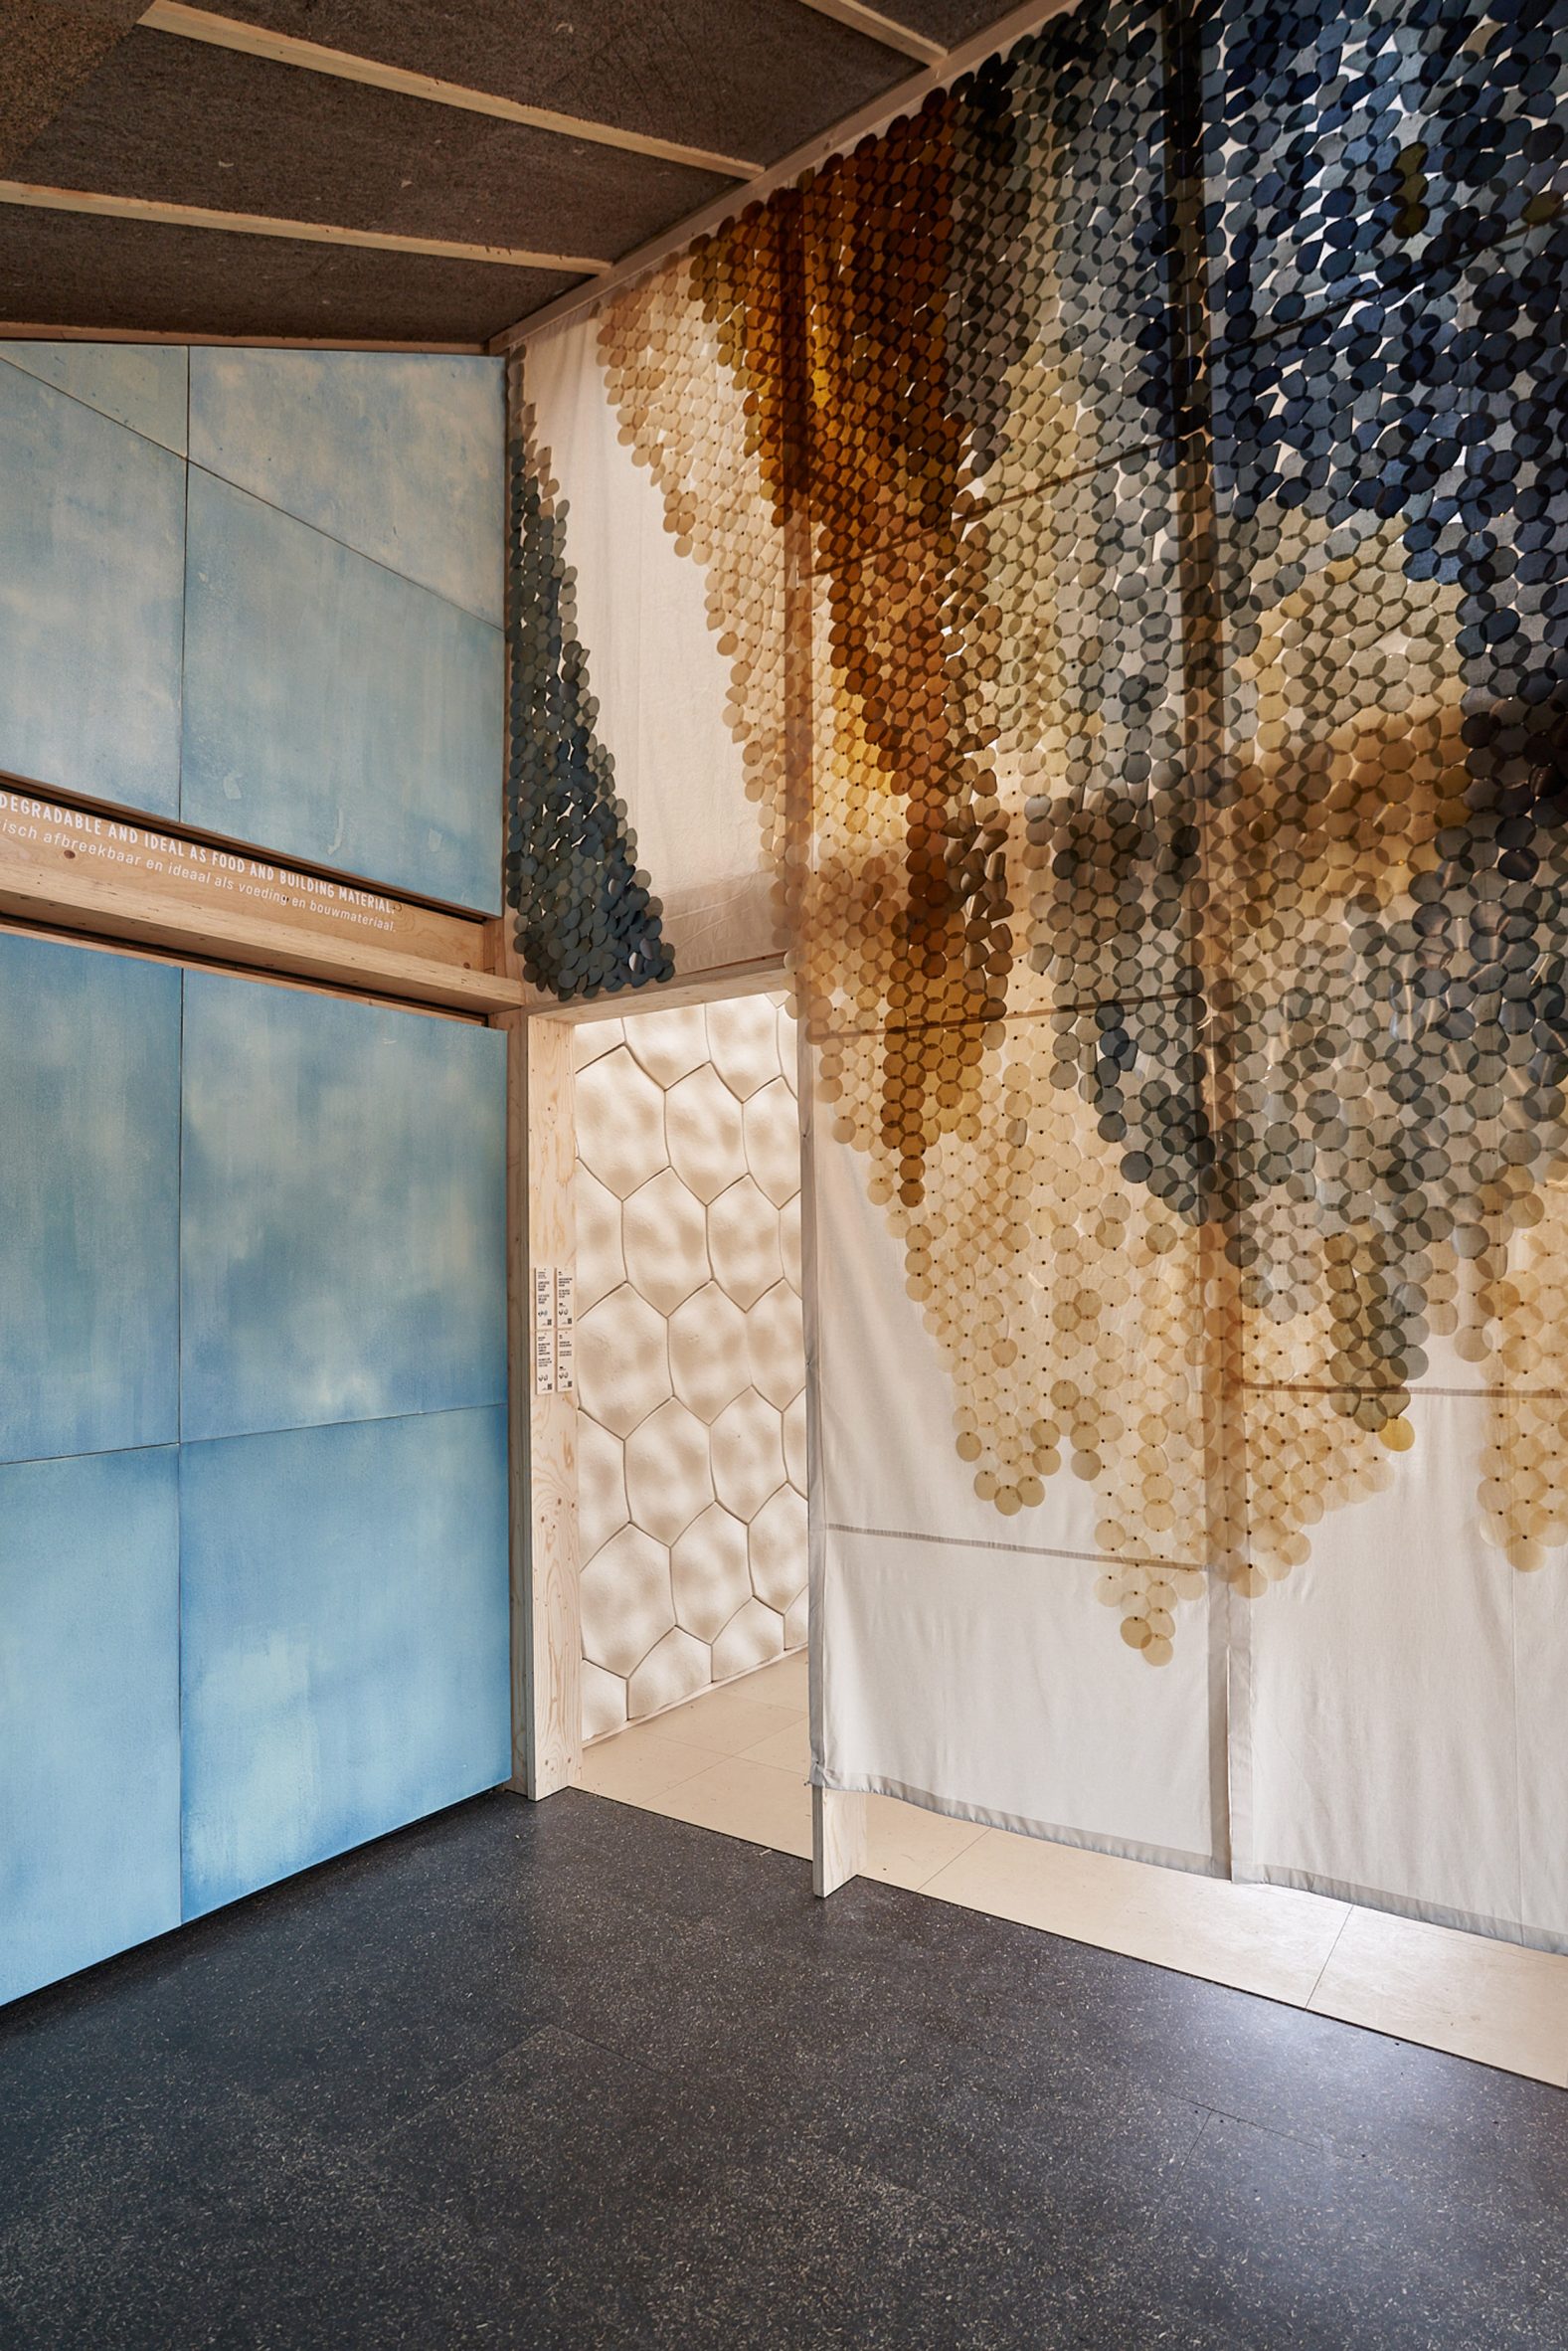 Algae and seaweed in biomaterials house by Biobased Creations